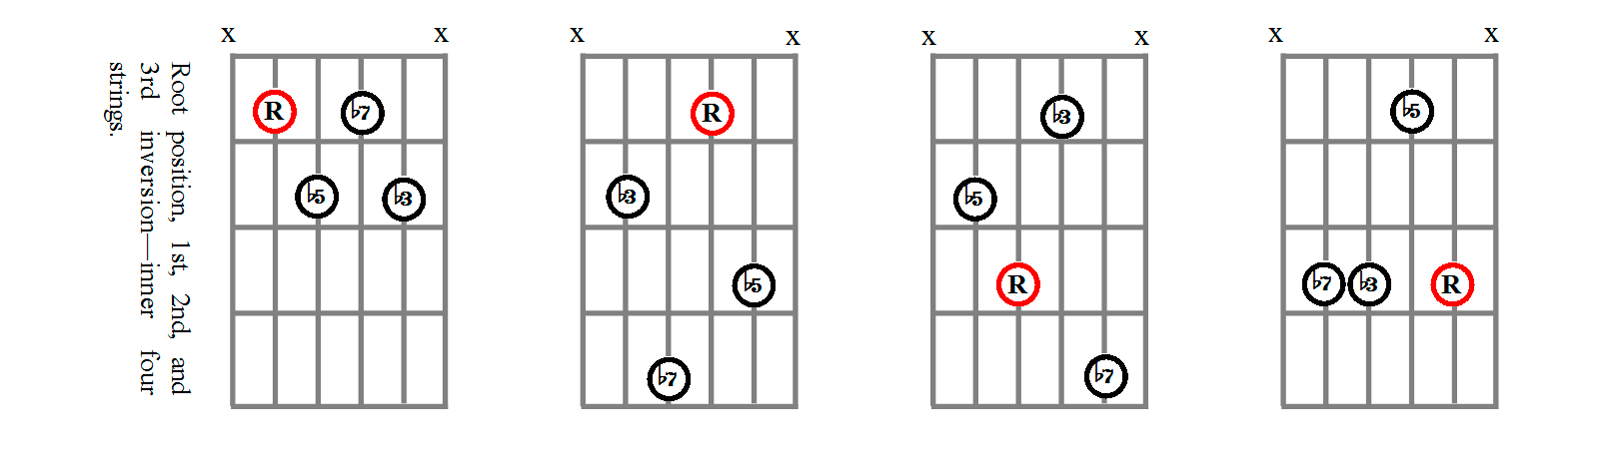 Minor Seventh Flat-Five Chord Shapes Using Strings 5, 4, 3,  and 2